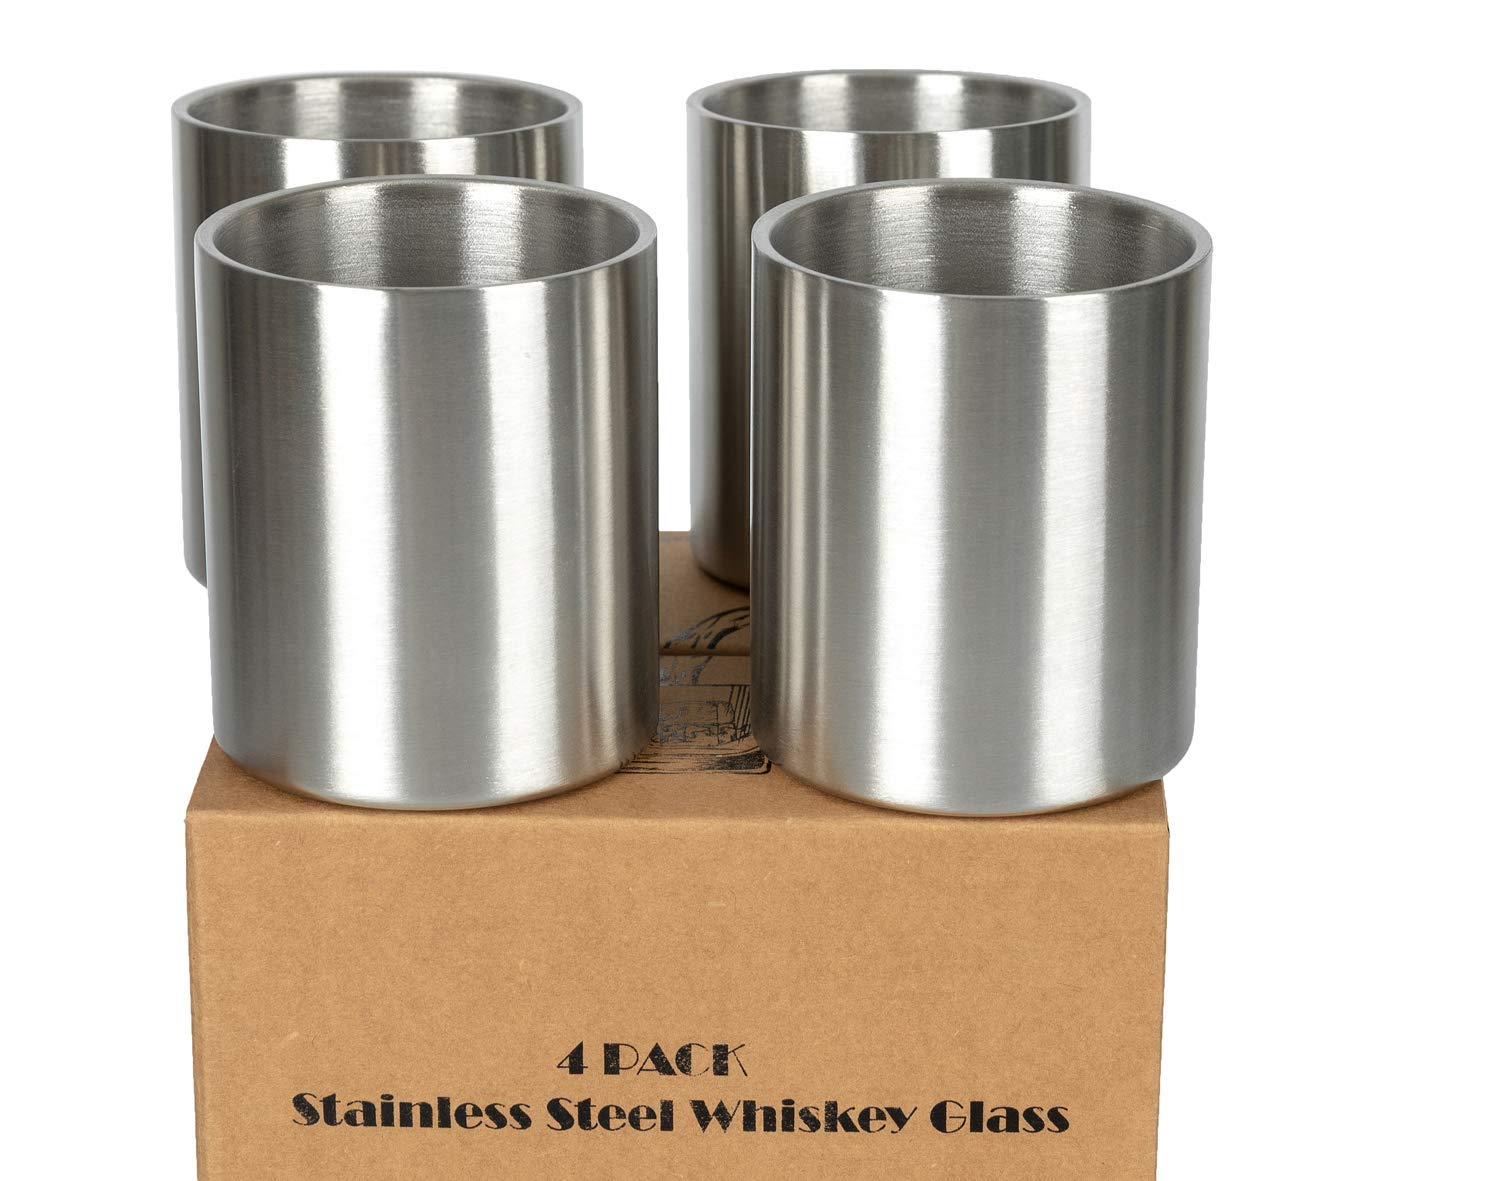 Jillmo Whiskey glass Set of 4 Stainless Steel Lowball glasses - 10 oz Insulated Shatterproof Outdoor Bourbon glass - Ideal gift for Fam